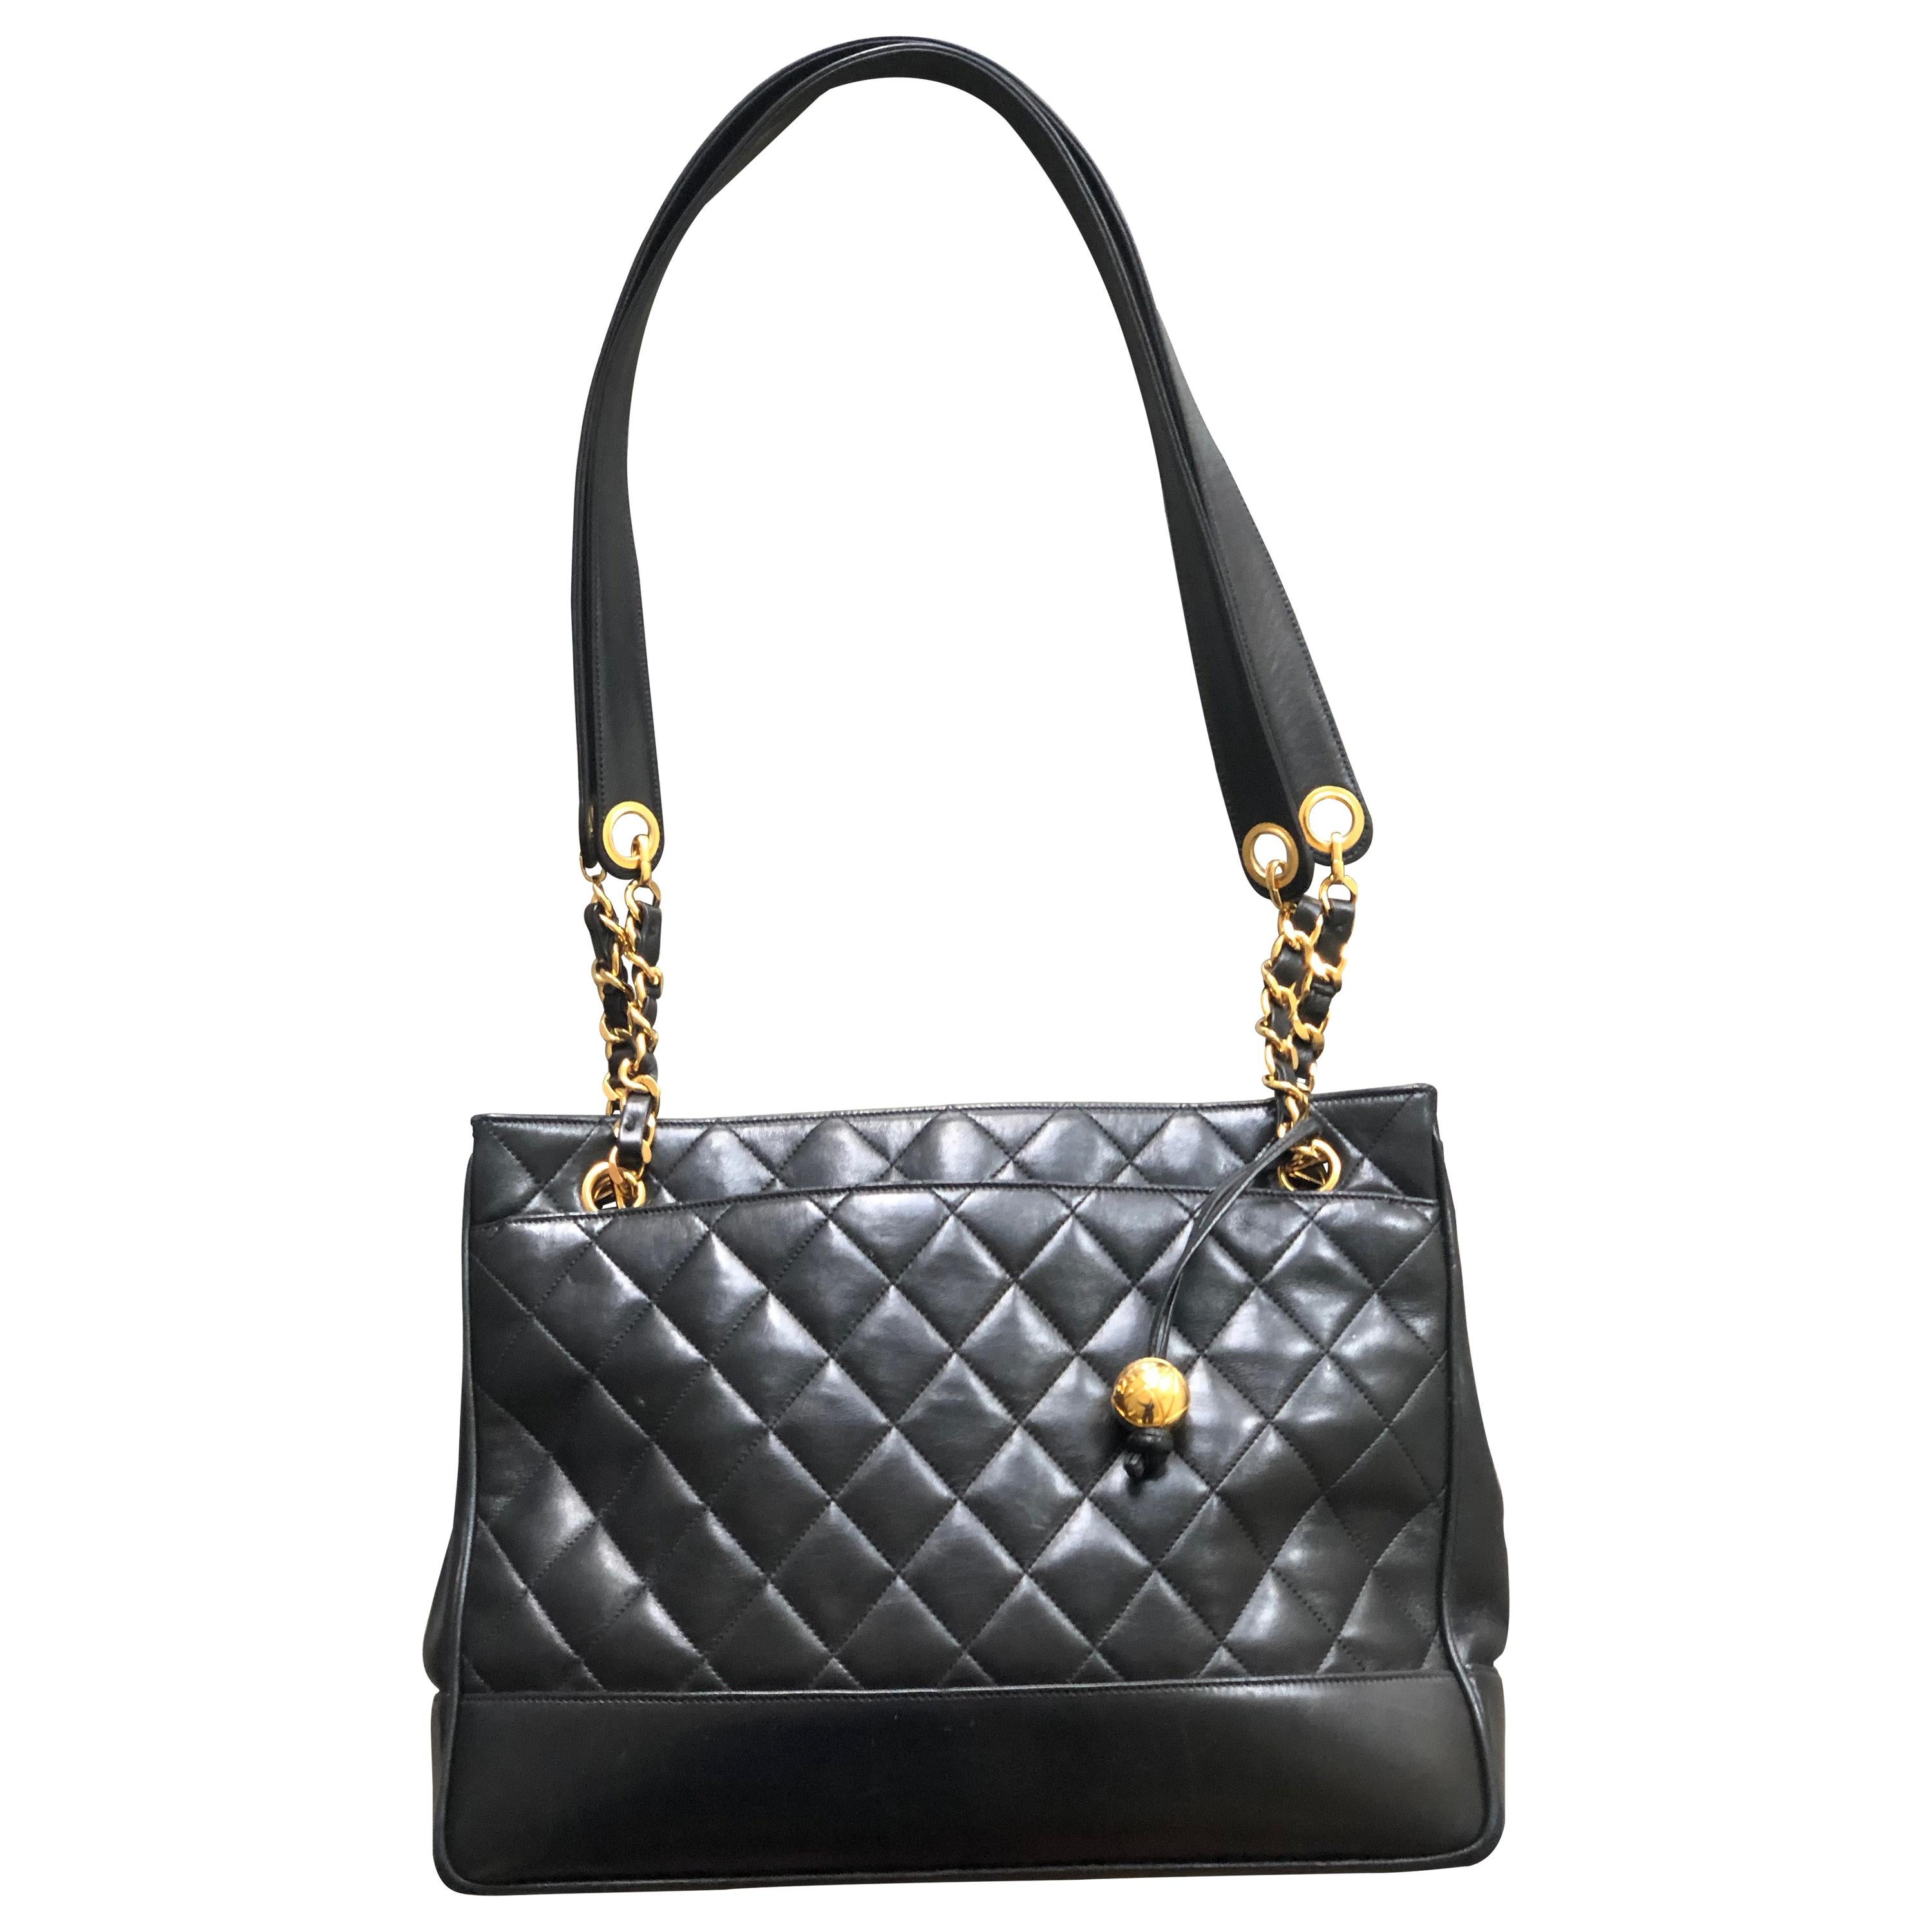 Chanel Large Black Leather Shoulder Bag with Gold Hardware and Quilted Details  For Sale